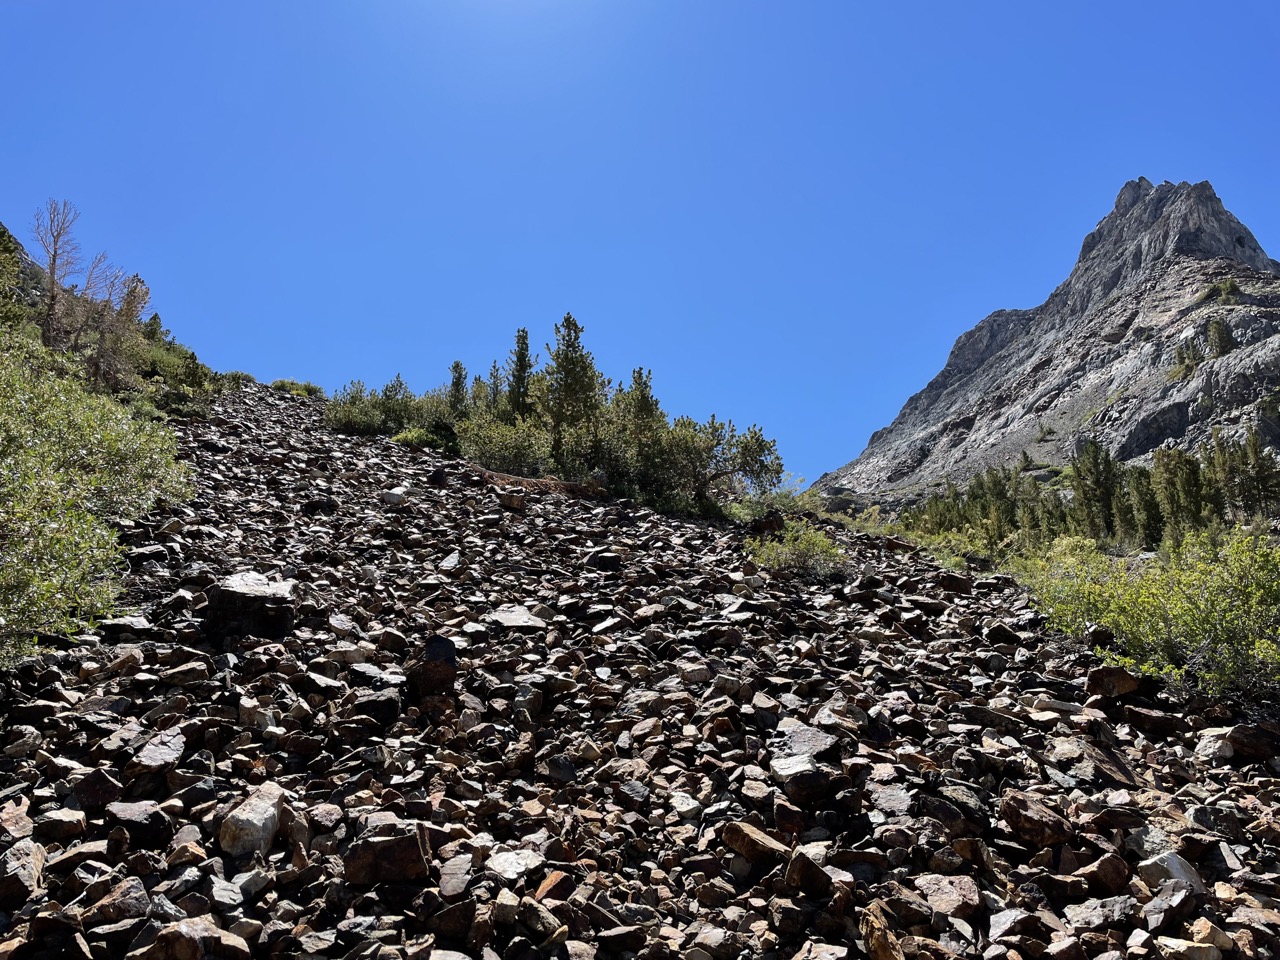 Crumbly slope opens up to a welcome easy scree field.